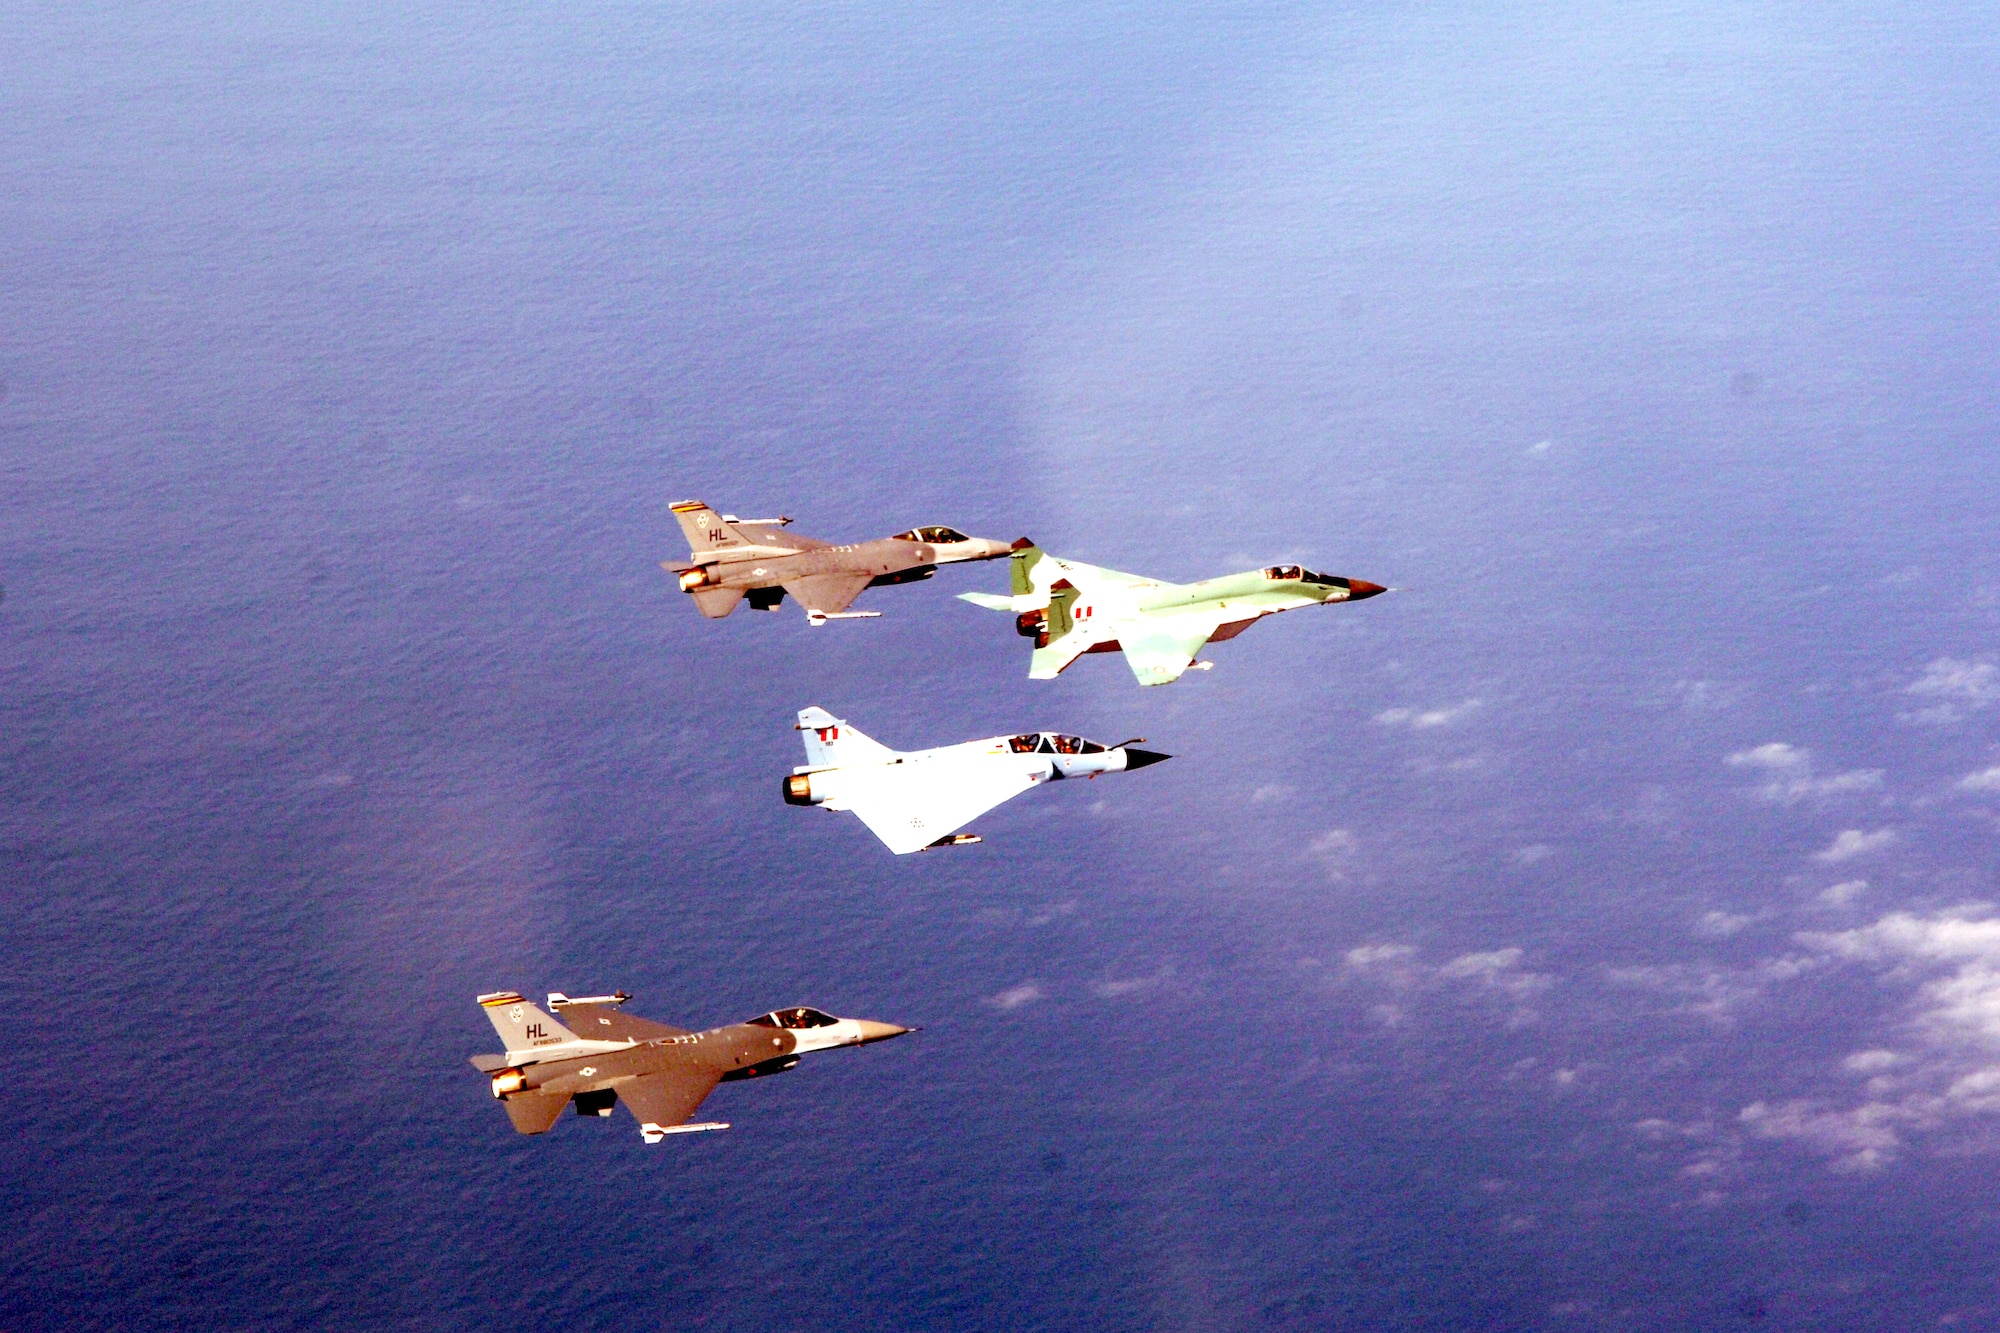 Two F-16 Fighting Falcons form up with a Peruvian MiG-29 and Mirage 2000 during dissimilar air combat training Feb. 15 as part of Falcon and Condor 2007, a joint exercise between the U.S. and Peruvian Air Forces. The exercise allows the U.S. military to build relationships with military and civilian leaders of Peru. The F-16s are from the 34th Fighter Squadron at Hill Air Force Base, Utah. (U.S. Air Force photo/Tech. Sgt. Eric Kreps)